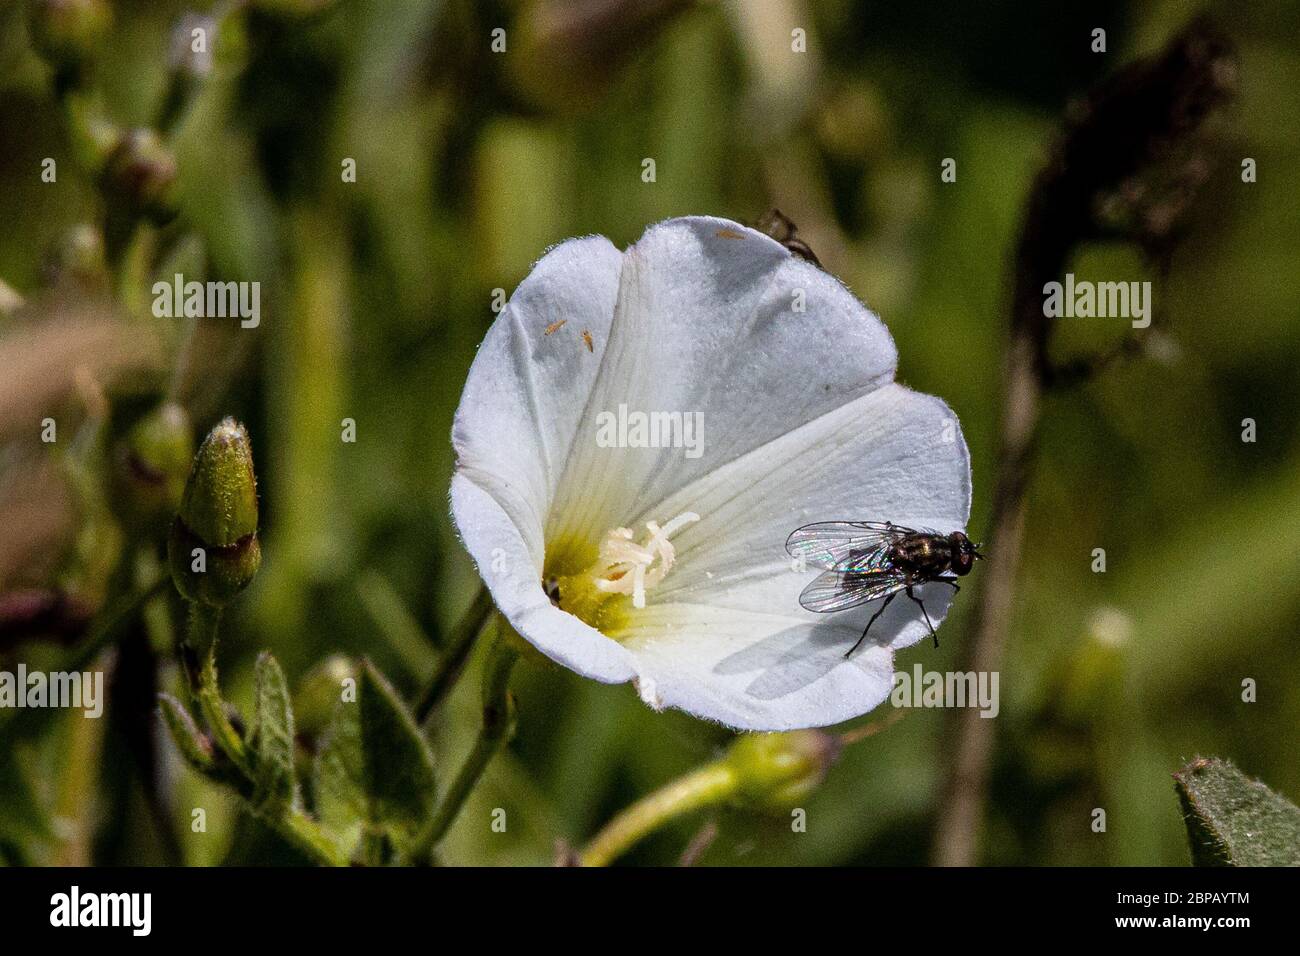 A Fly and other small insects gather on a Morning Glory flower (Convolvulus sepium) in California's Merced National Wildlife Refuge USA Stock Photo